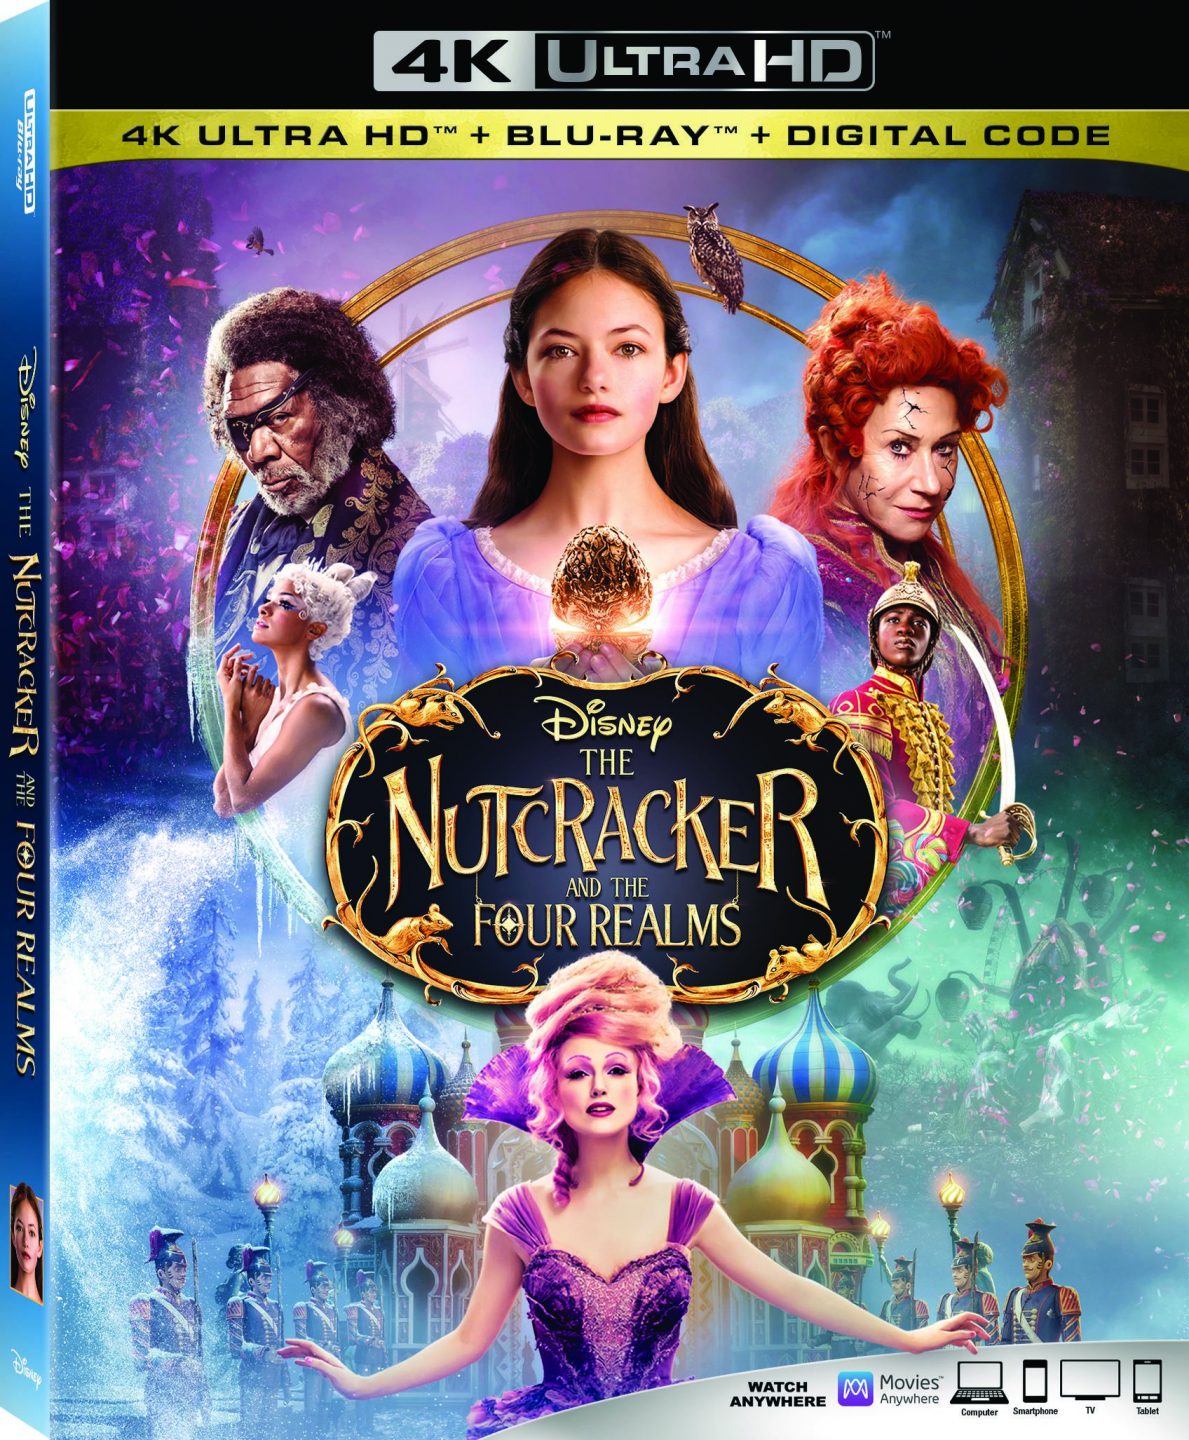 The Nutcracker And The Four Realms 4K Ultra HD Combo Pack cover (Walt Disney Studios Home Entertainment)